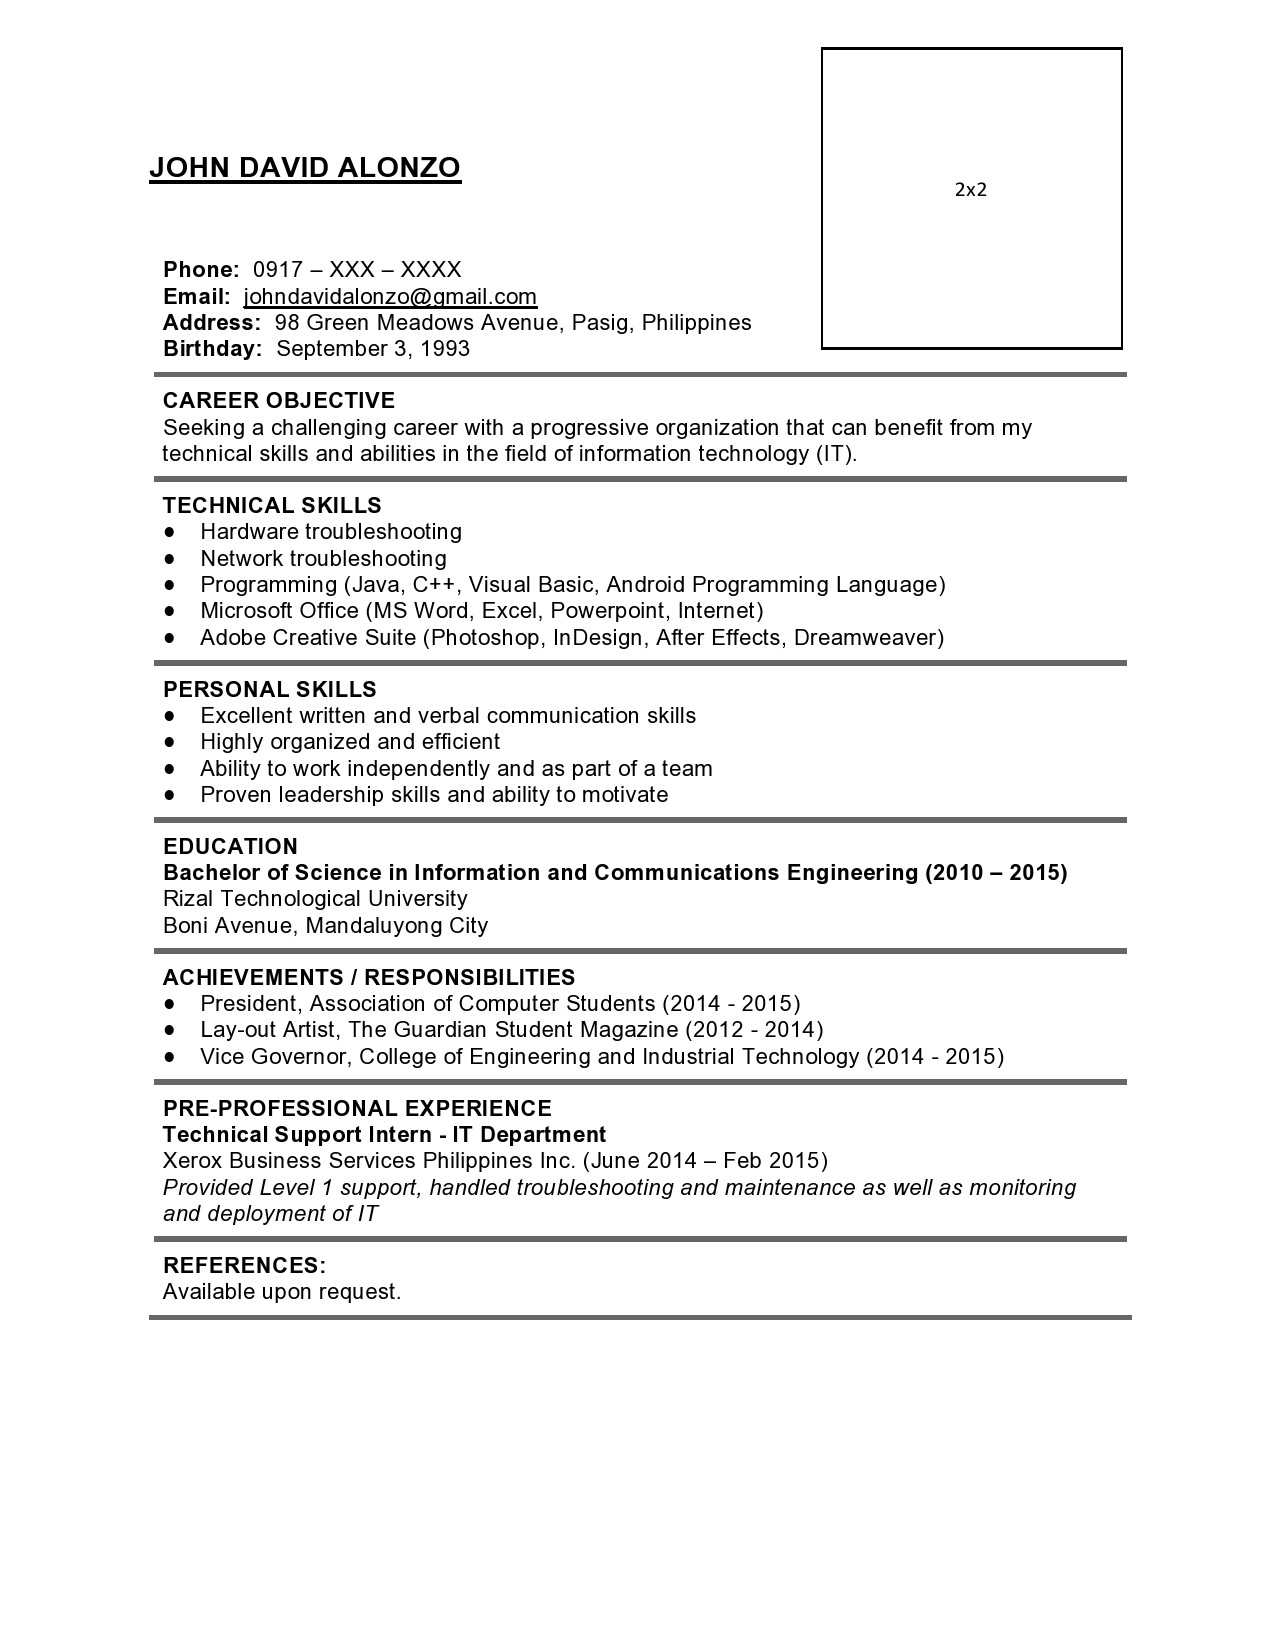 Sample Resume for Newly Graduated Student with No Experience Sample Resume formats for Fresh Graduates